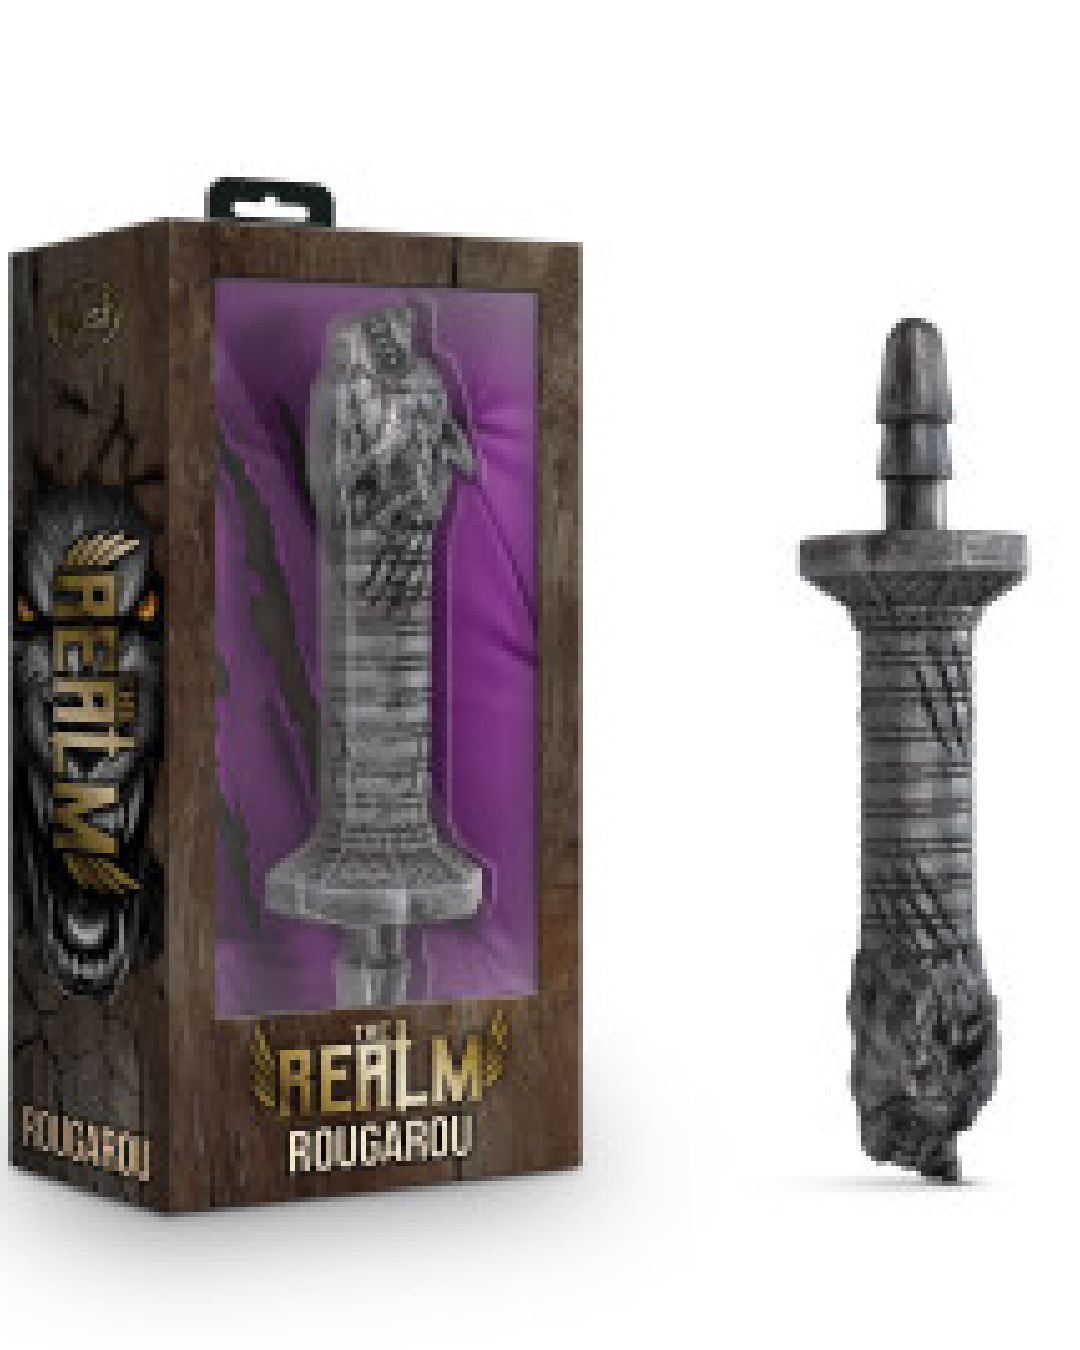  The Realm Rougarou Lock On Werewolf Handle product and box on white background 